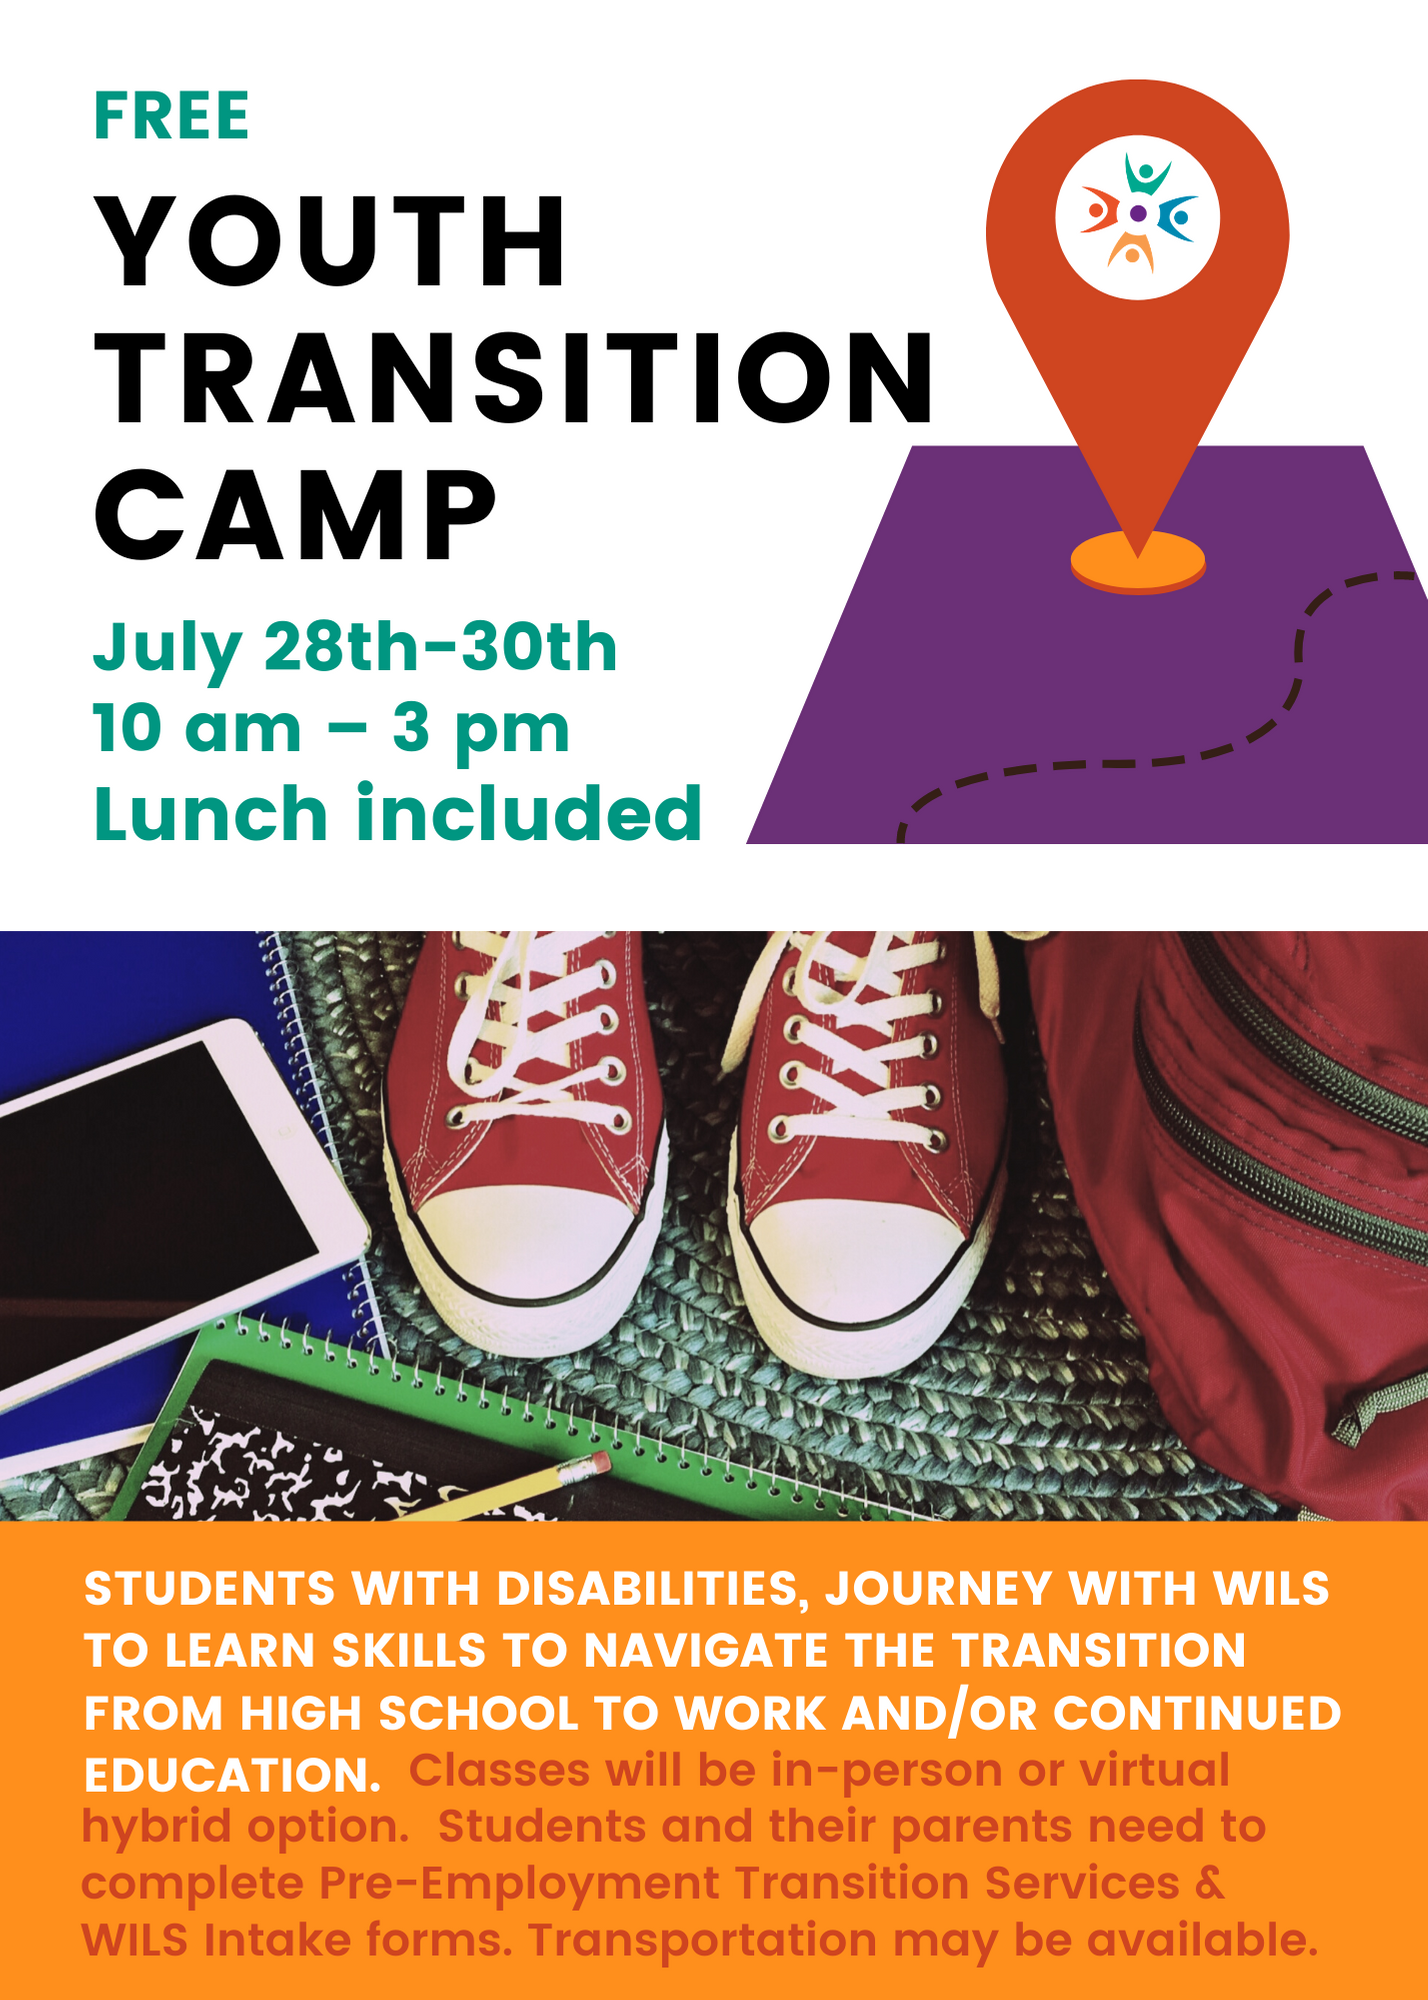 Youth Transition Camp. Students with disabilities, journey with WILS to learn skills to navigate the transition from high school to work and/or continued education.